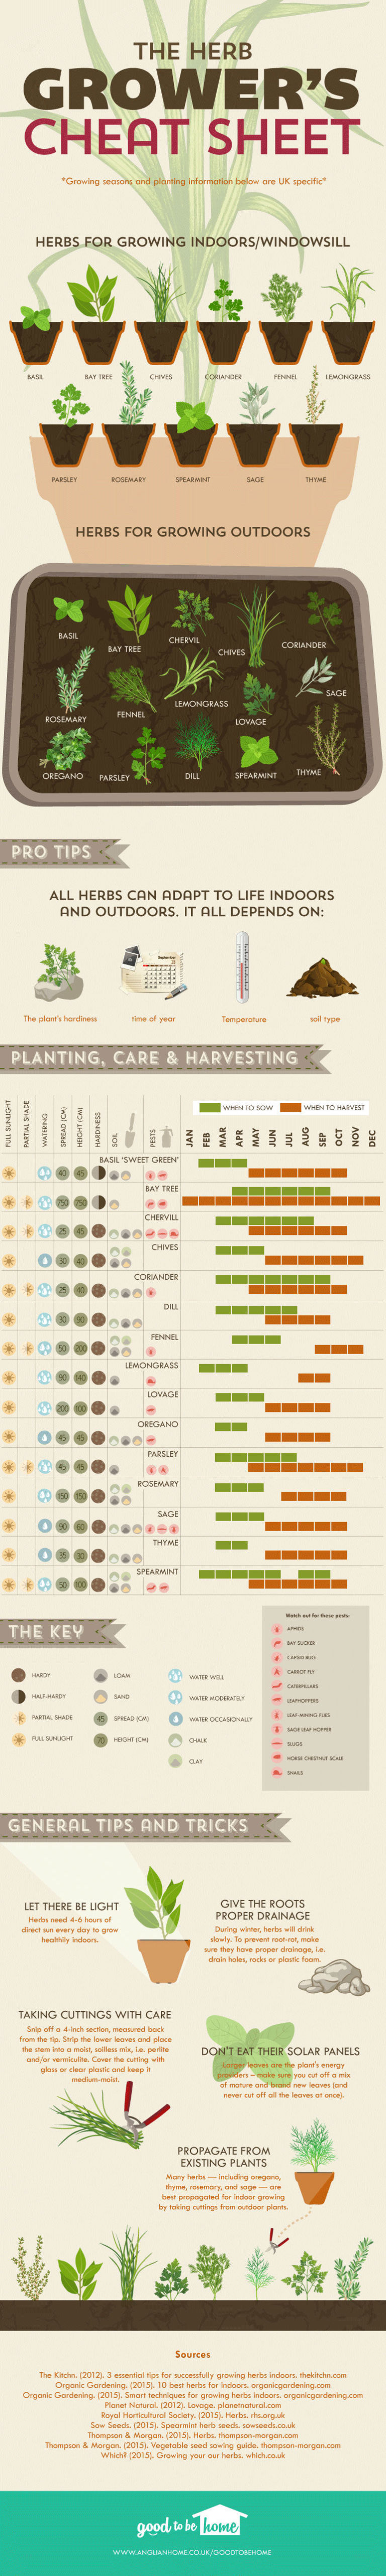 gallery-1431101019-the-herb-growers-cheat-sheet-infographic